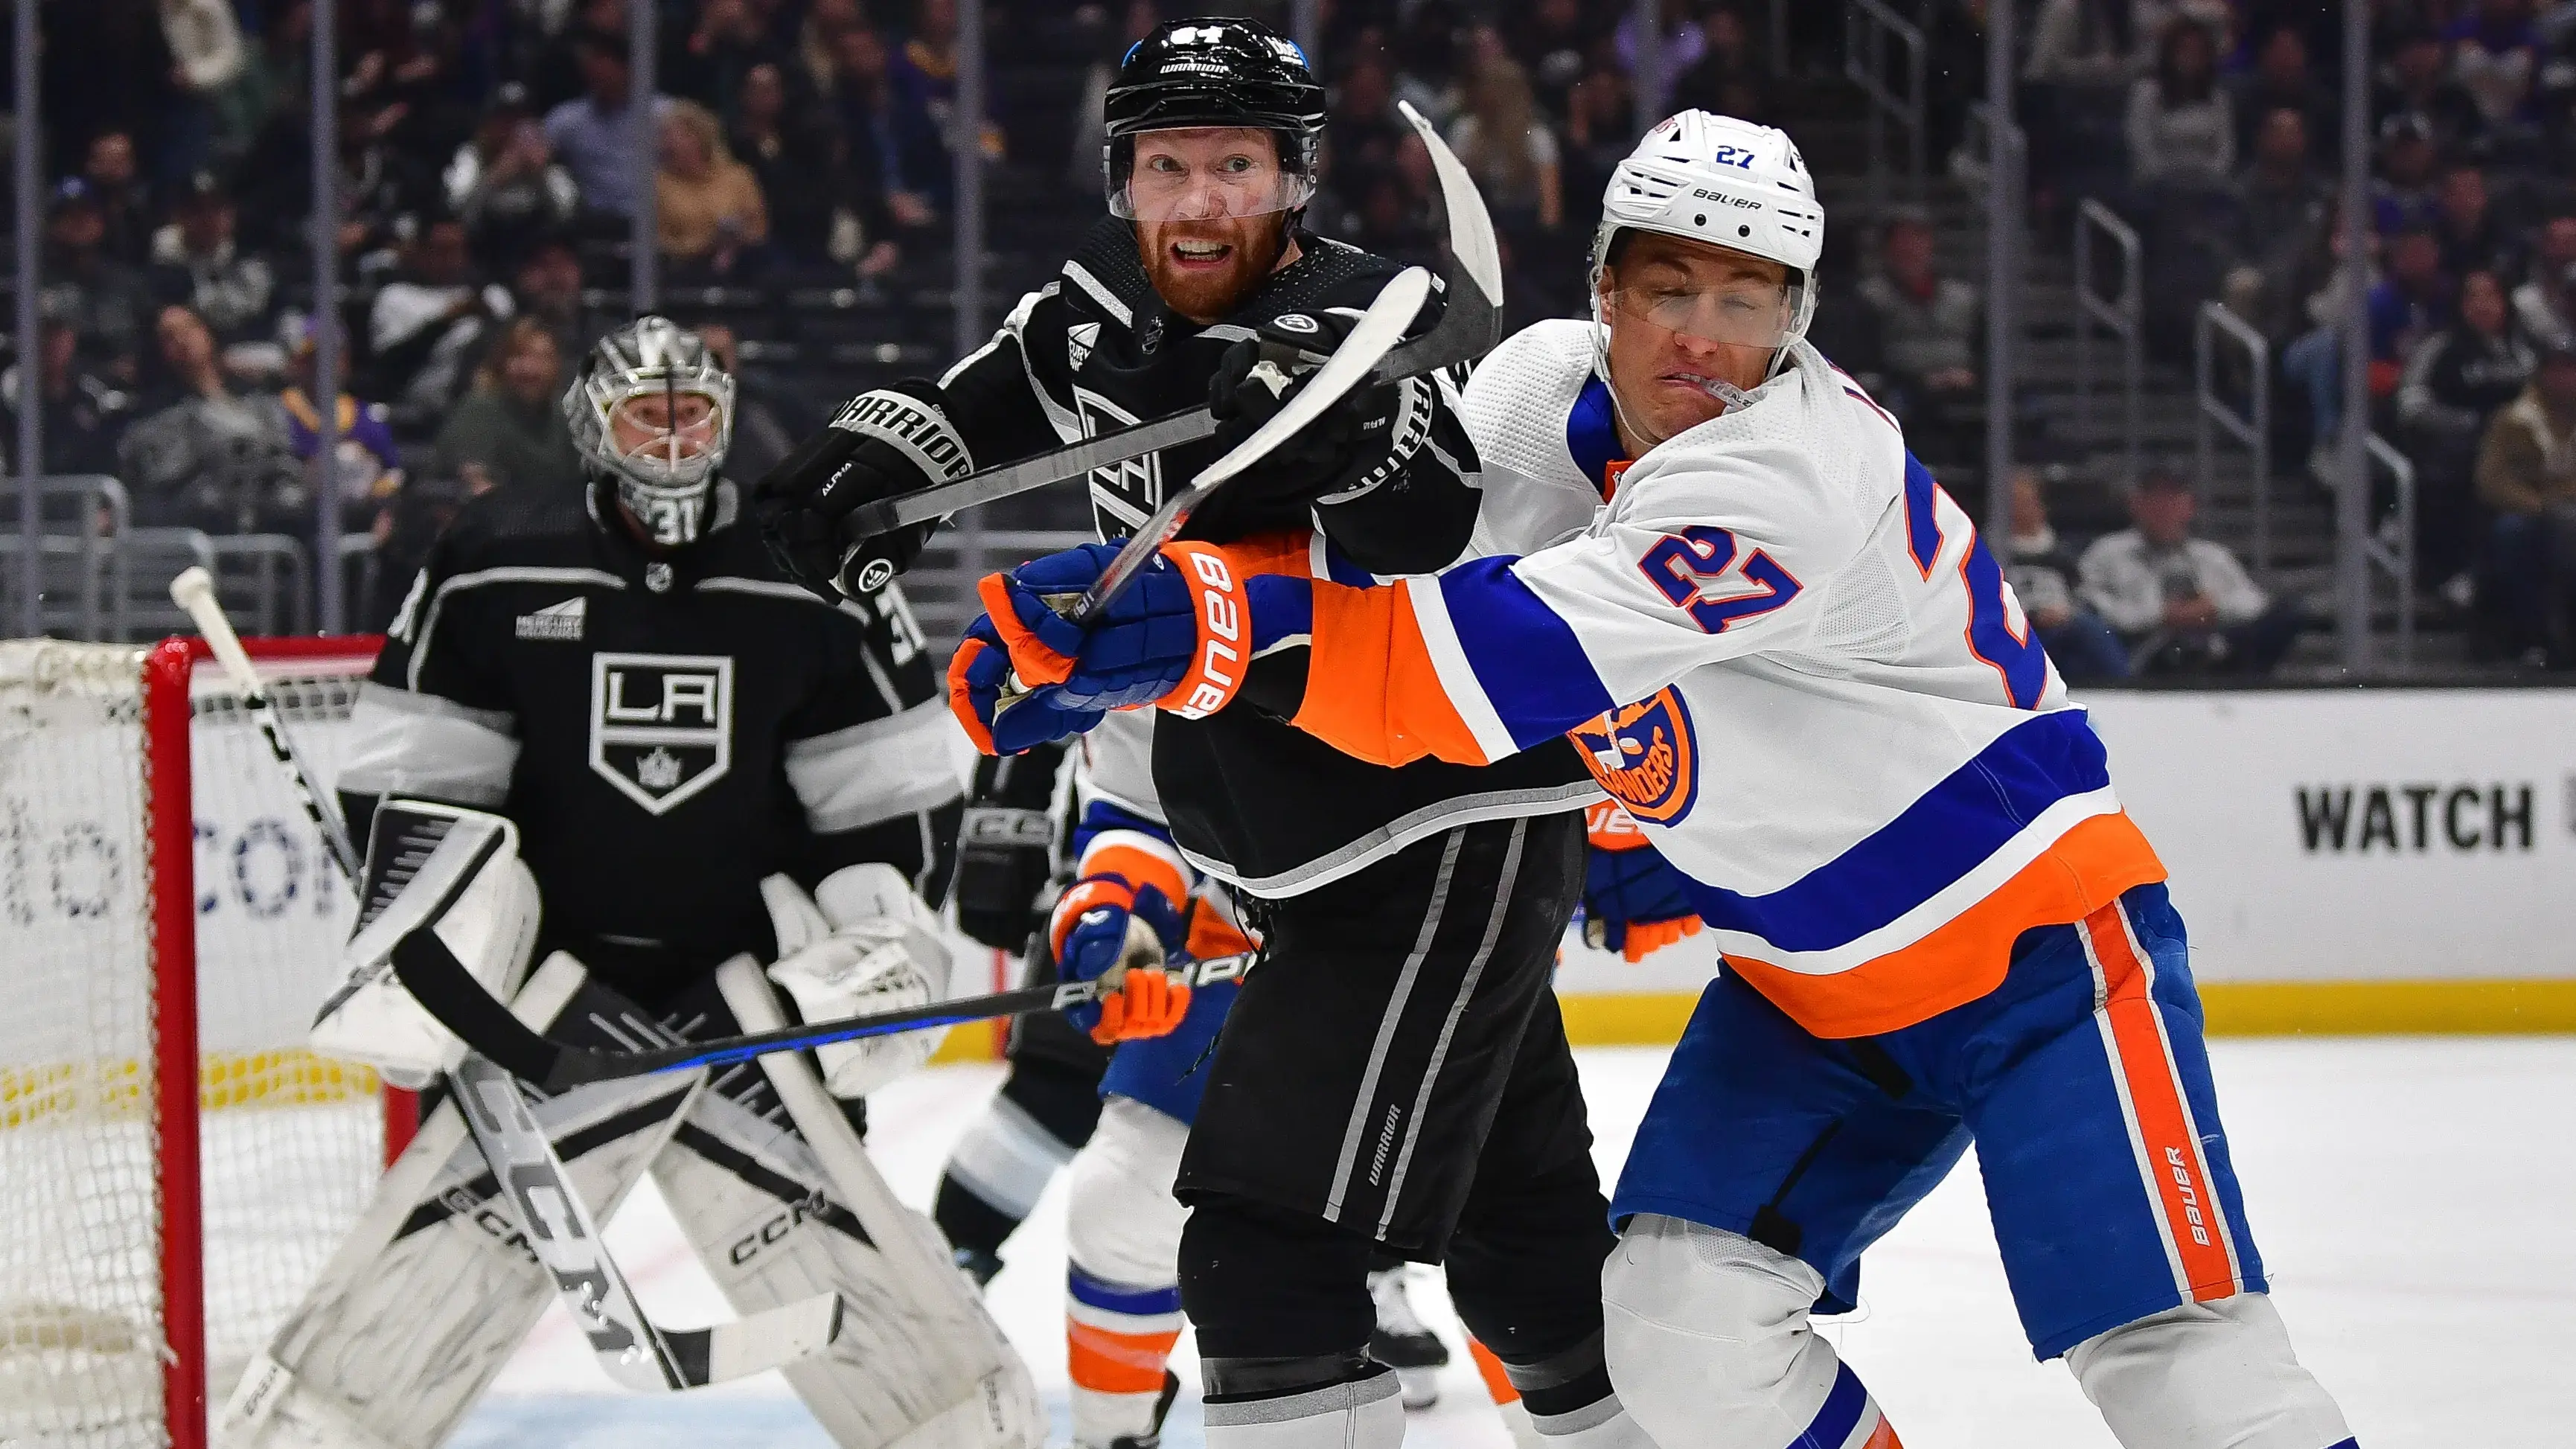 Los Angeles Kings defenseman Vladislav Gavrikov (84) plays for the puck against New York Islanders left wing Anders Lee (27) during the first period at Crypto.com Arena / Gary A. Vasquez - USA TODAY Sports